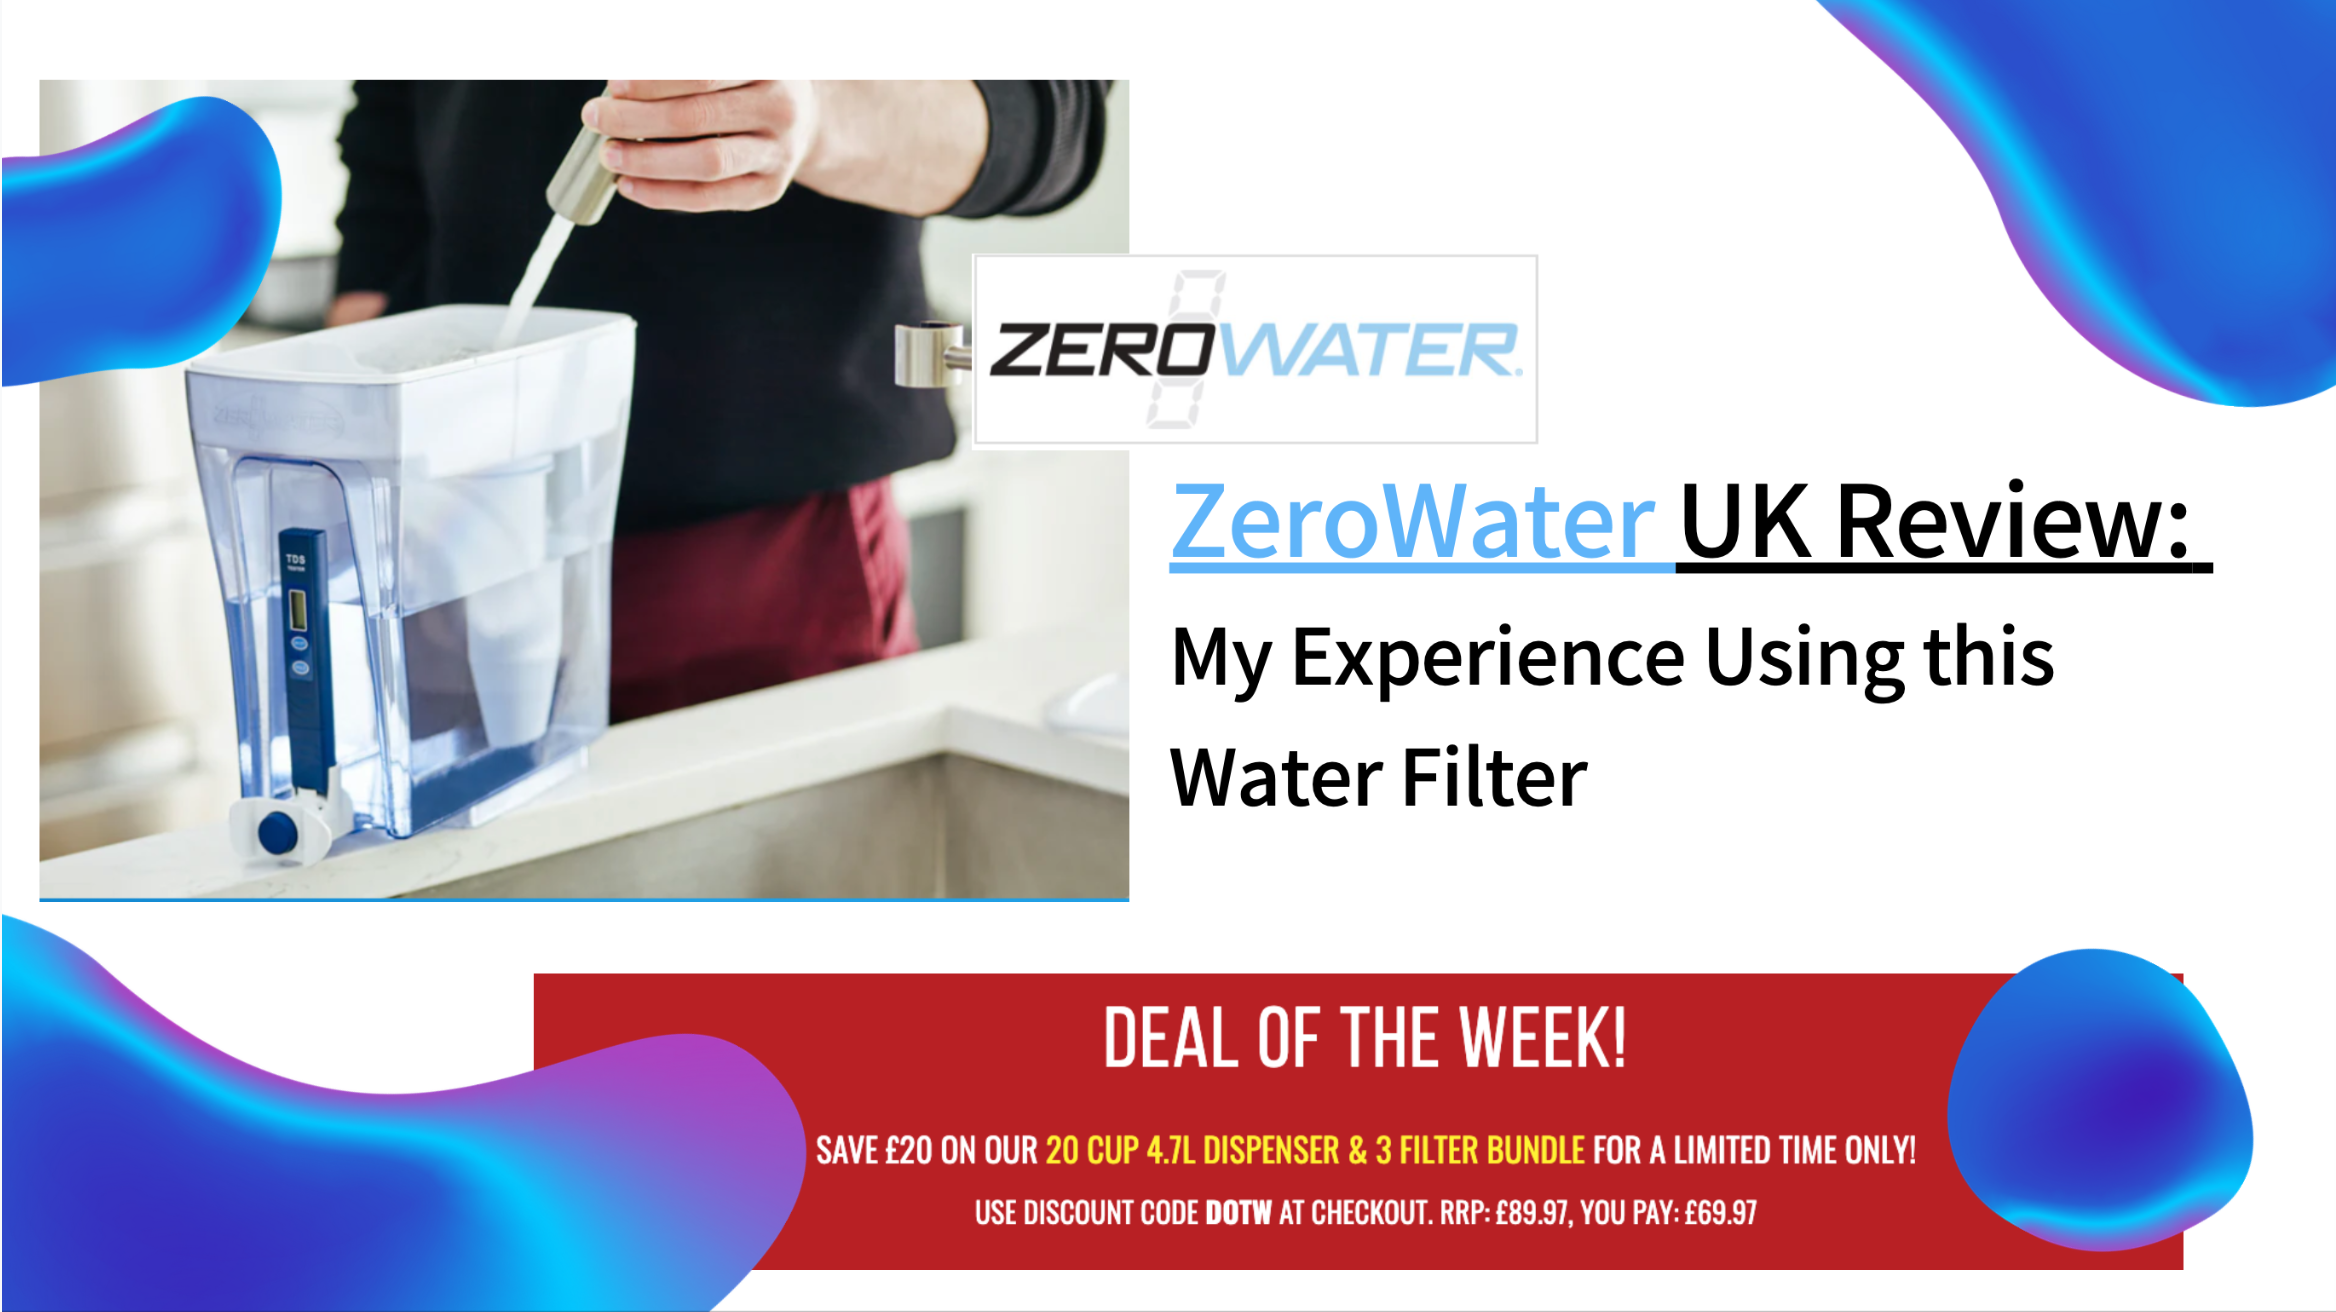 ZeroWater UK Review: My Experience Using this Water Filter